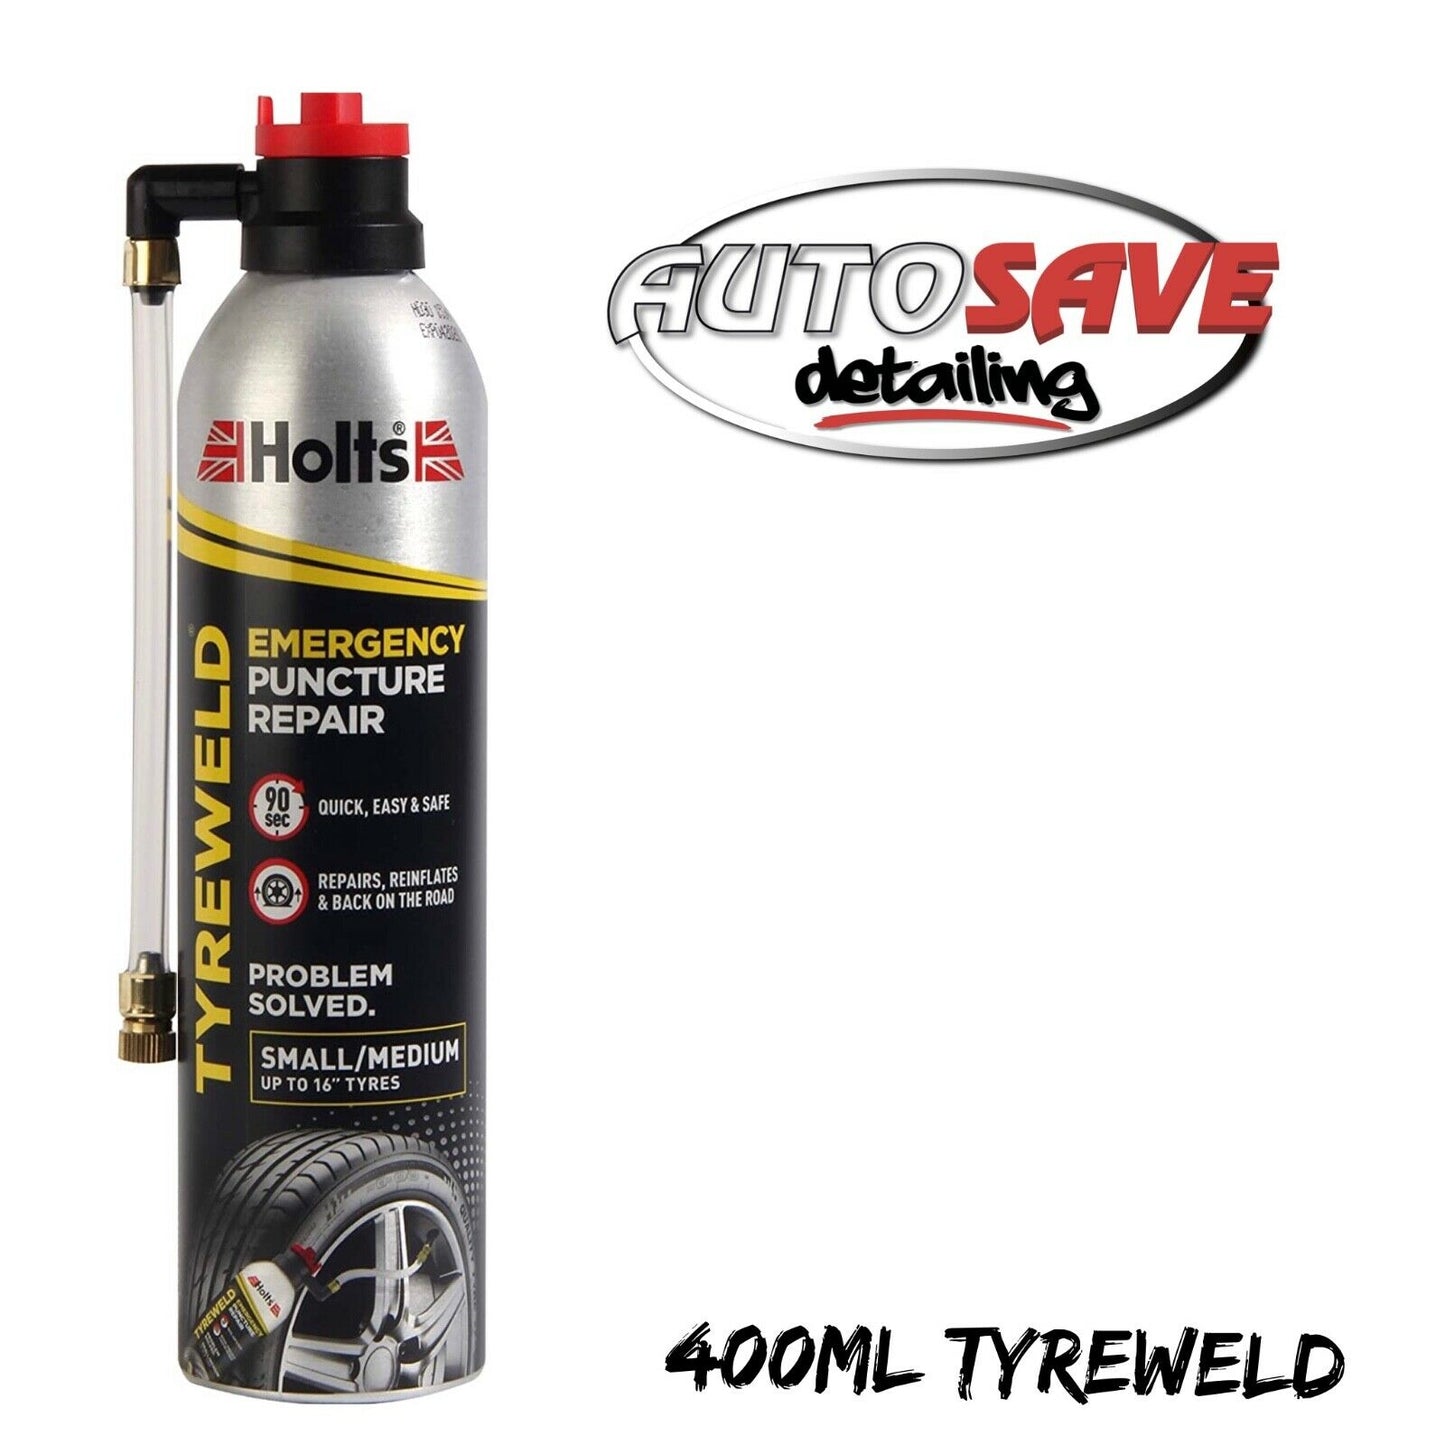 Holts Tyreweld Tyre Weld Emergency Puncture Repair Seals Inflates 16"+400ml